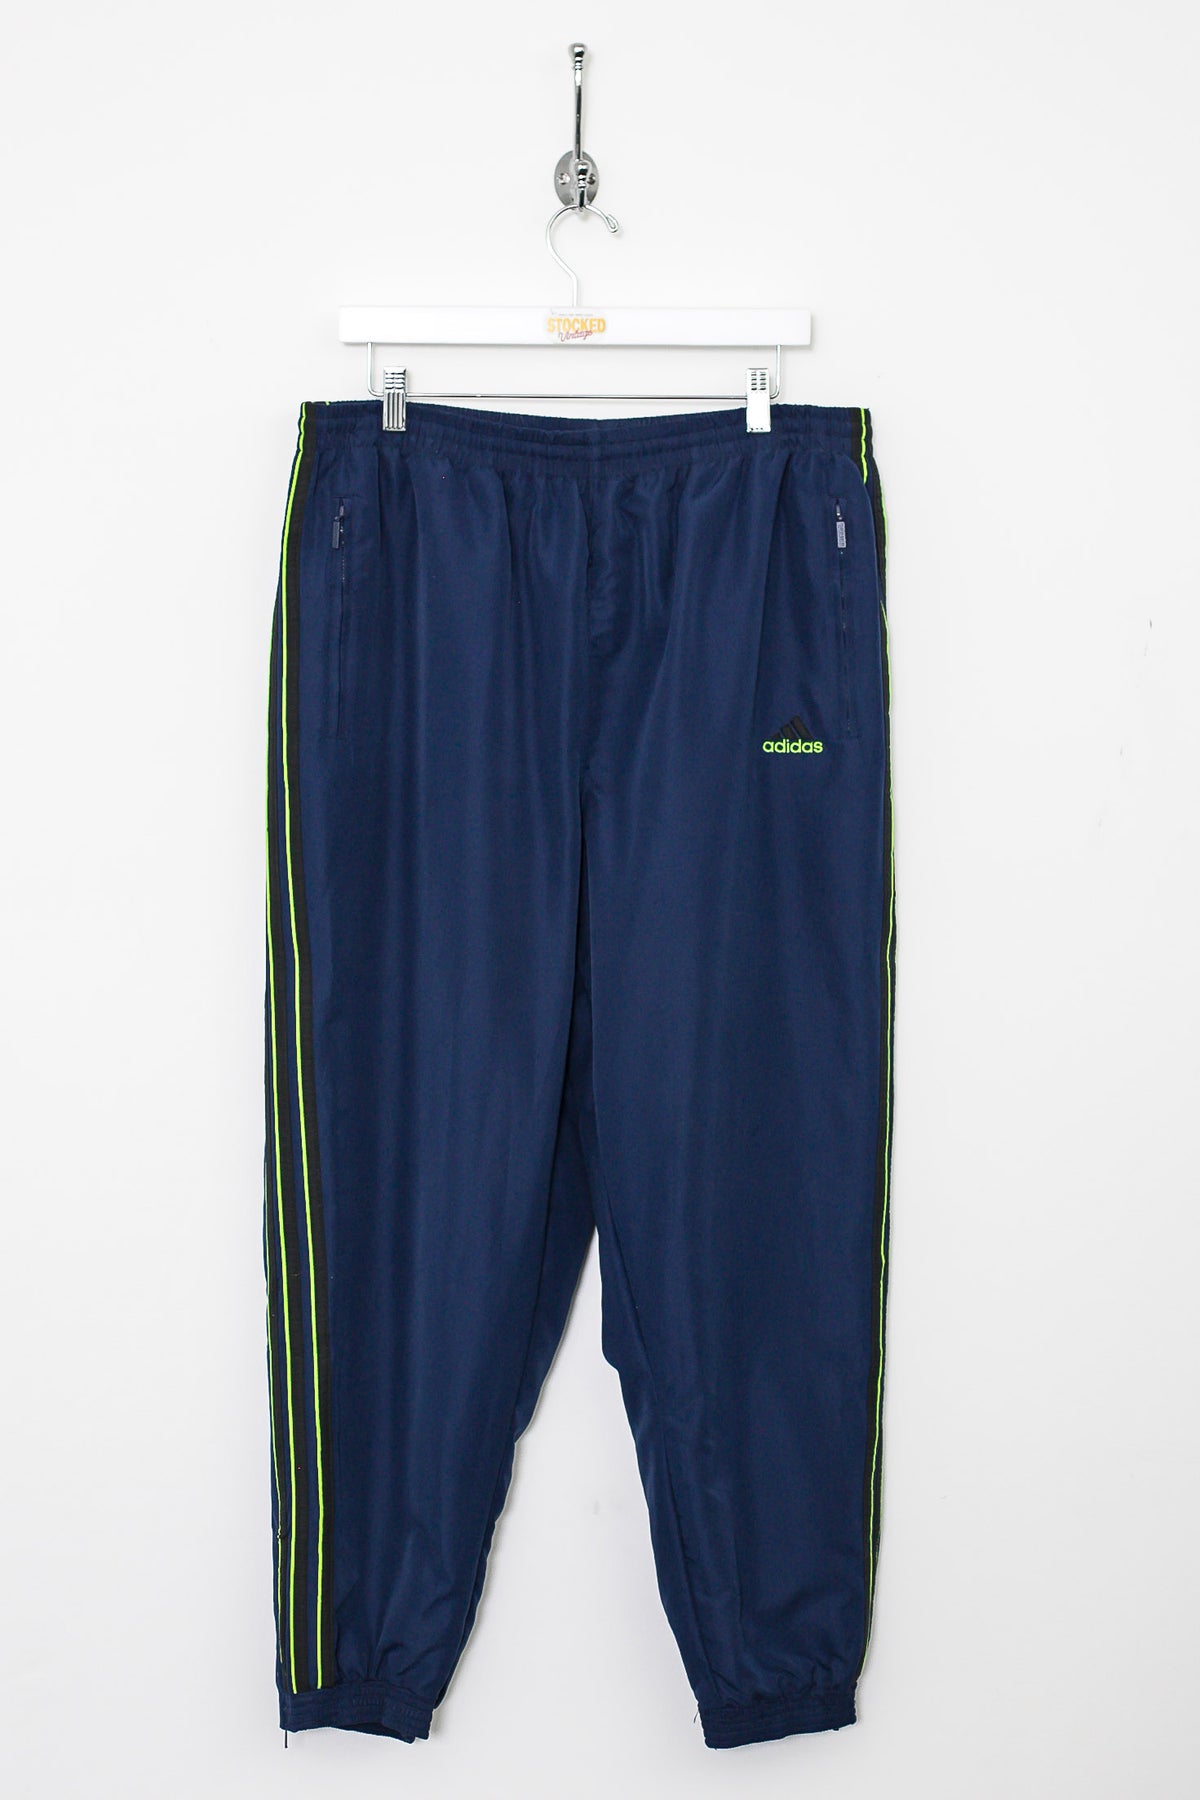 00s Adidas Tracksuit Bottoms (M)